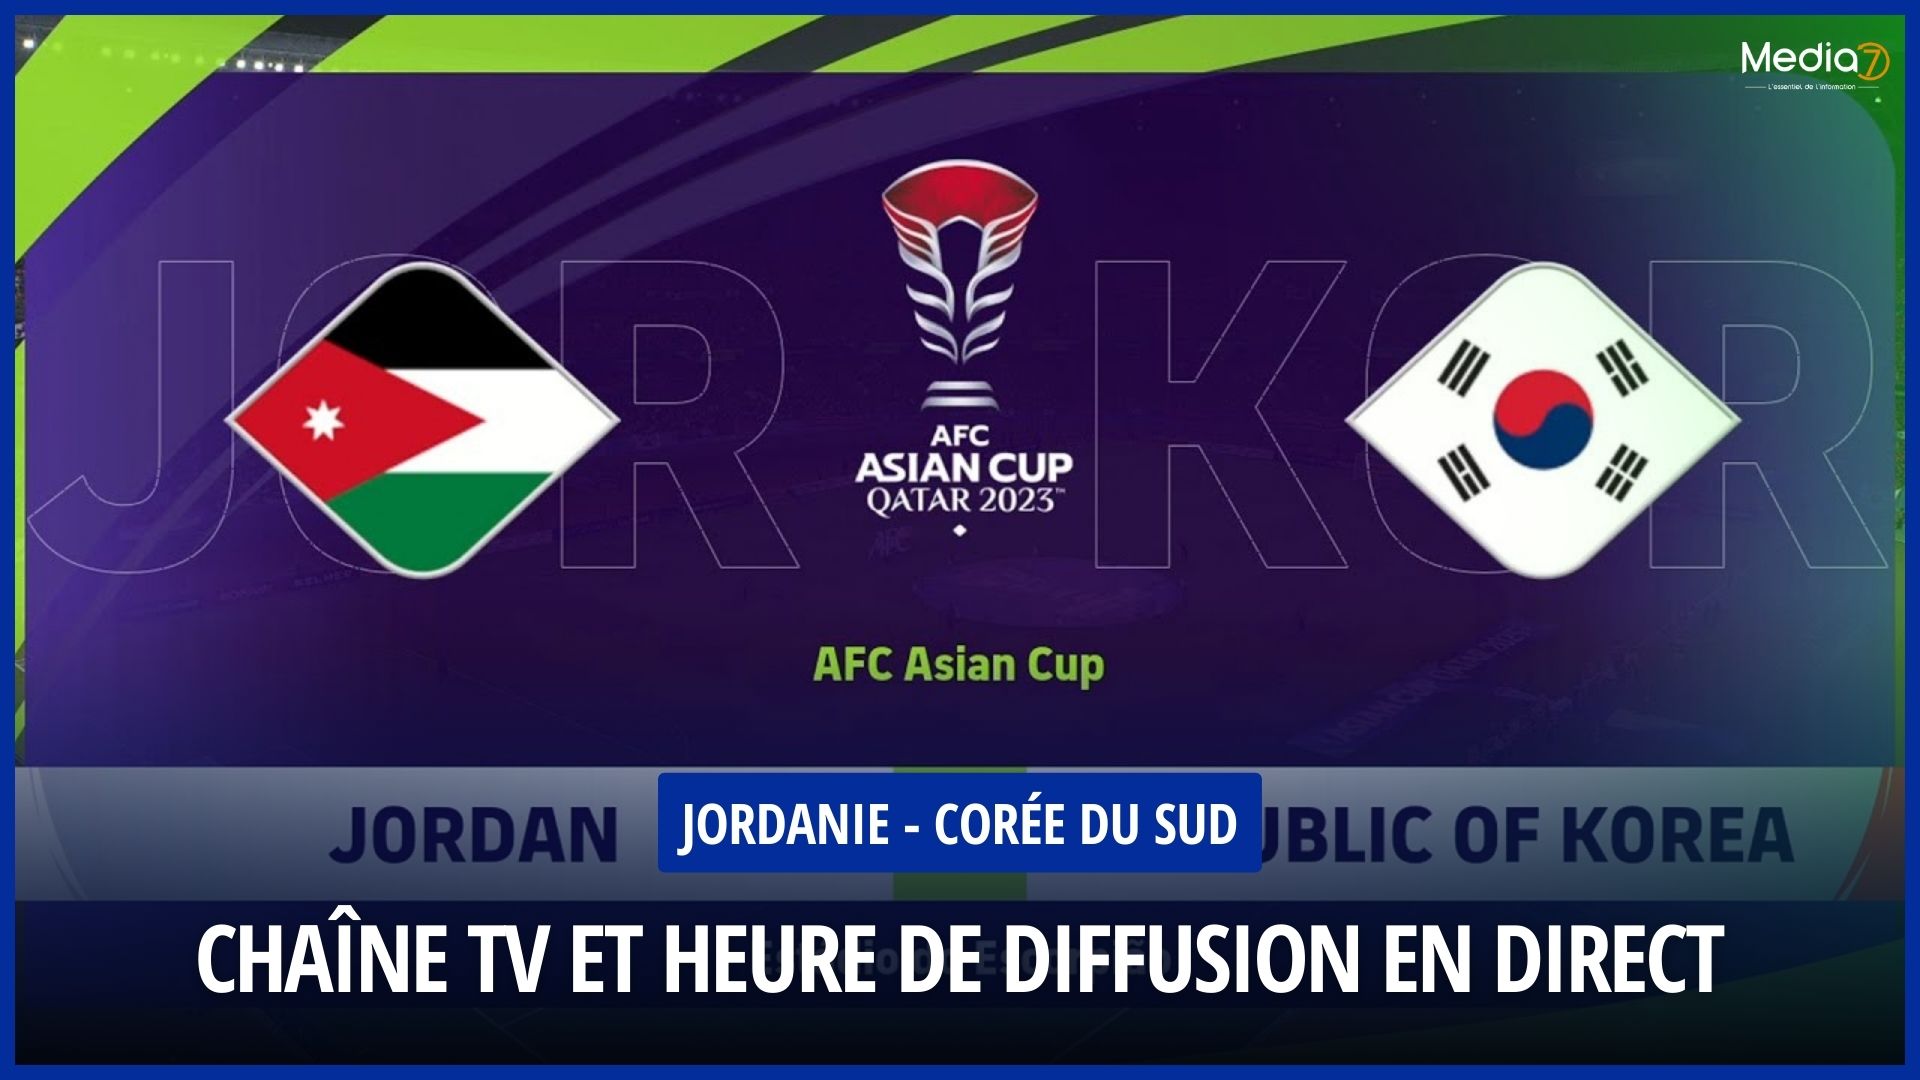 Asian Cup: Jordan - South Korea Live: Schedule and Broadcast Channels - Media7